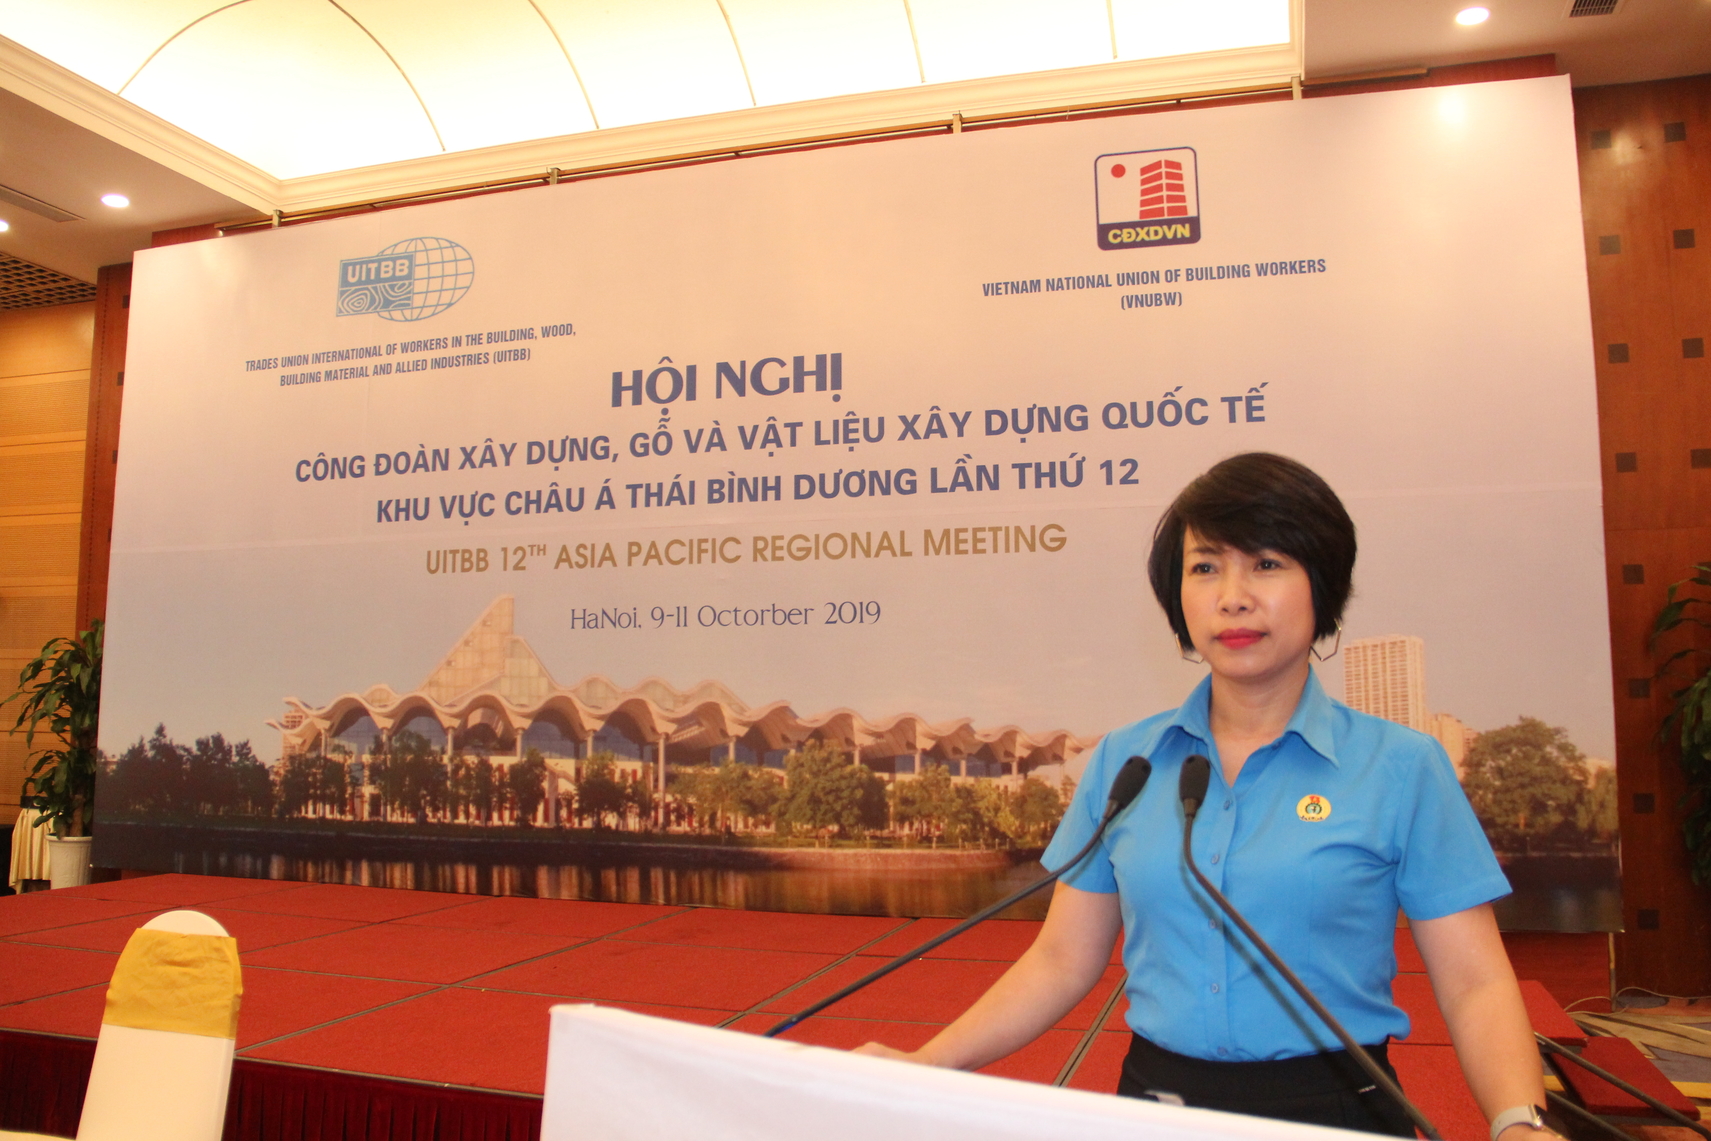 Welcome Speech by Mrs. Nguyen Thi Thuy Le, President of the VNUBW at ...